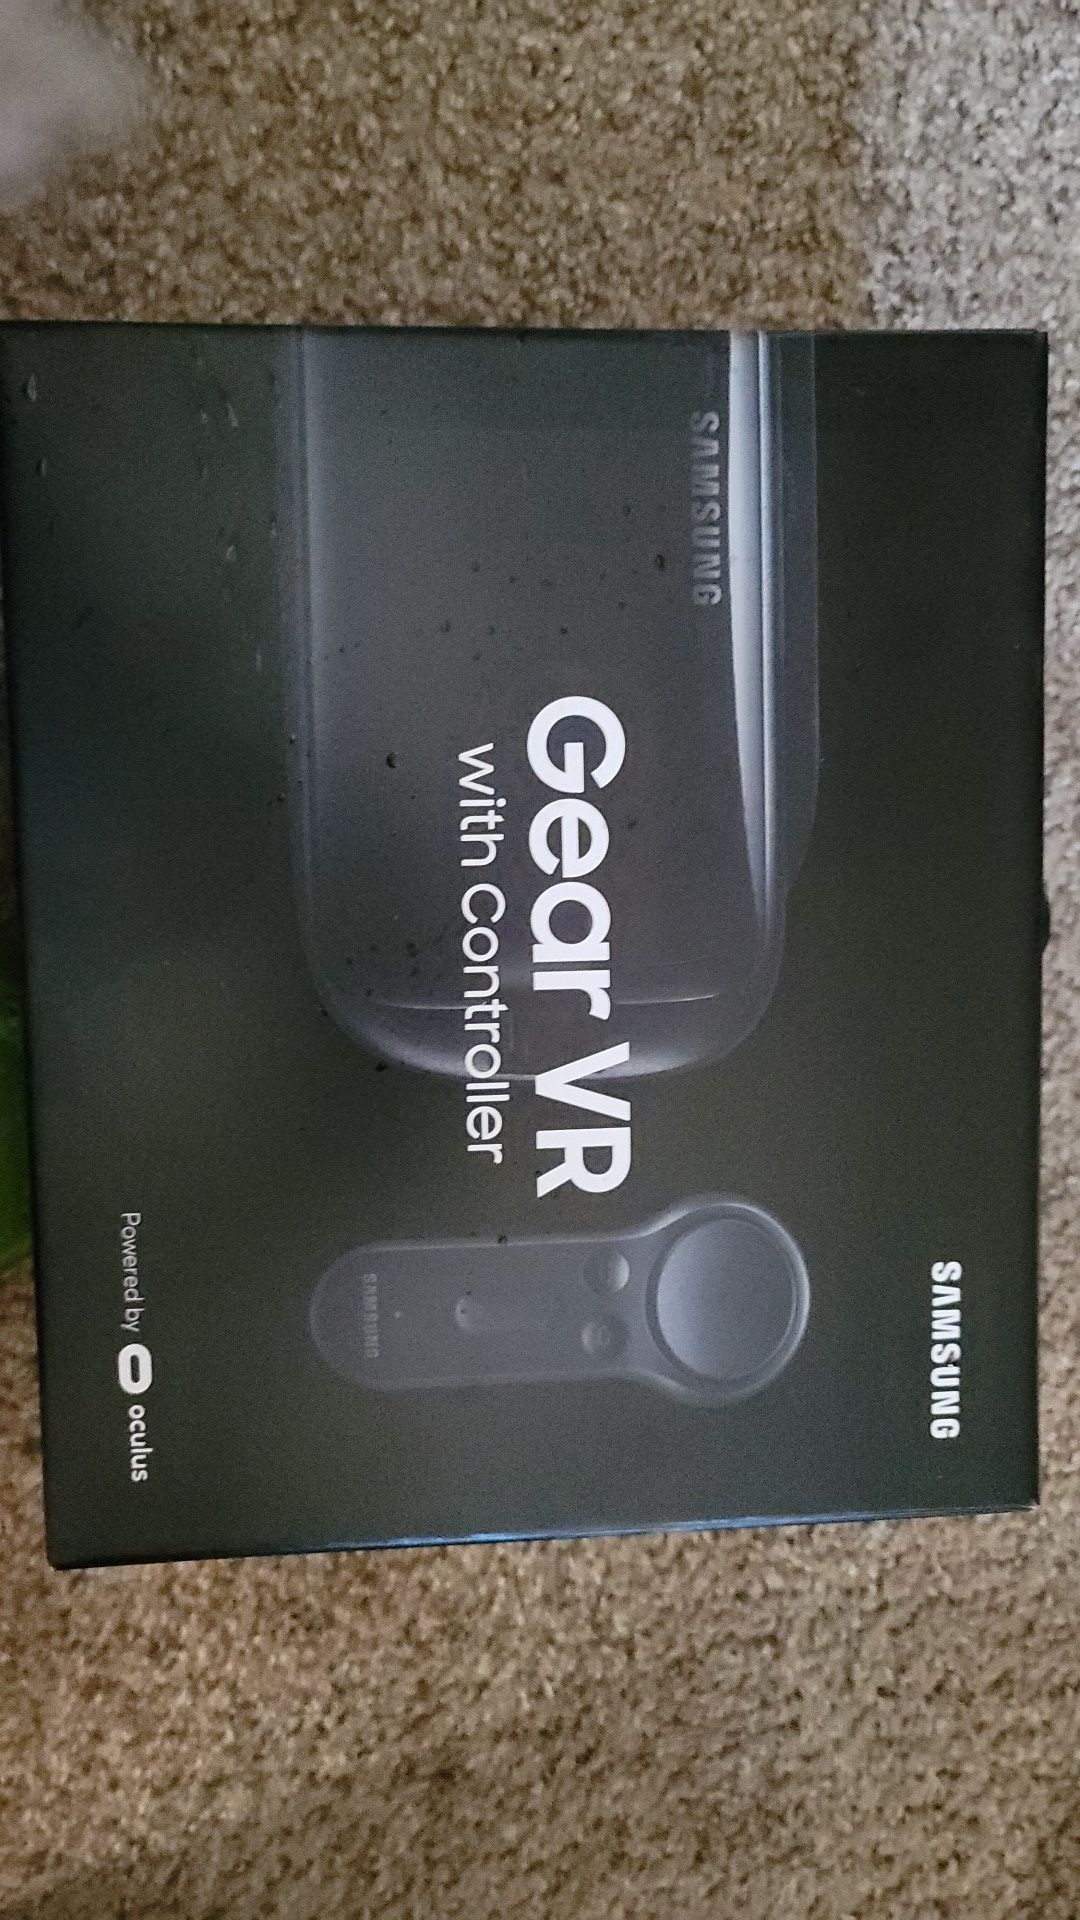 Samsung Gear VR with Controller